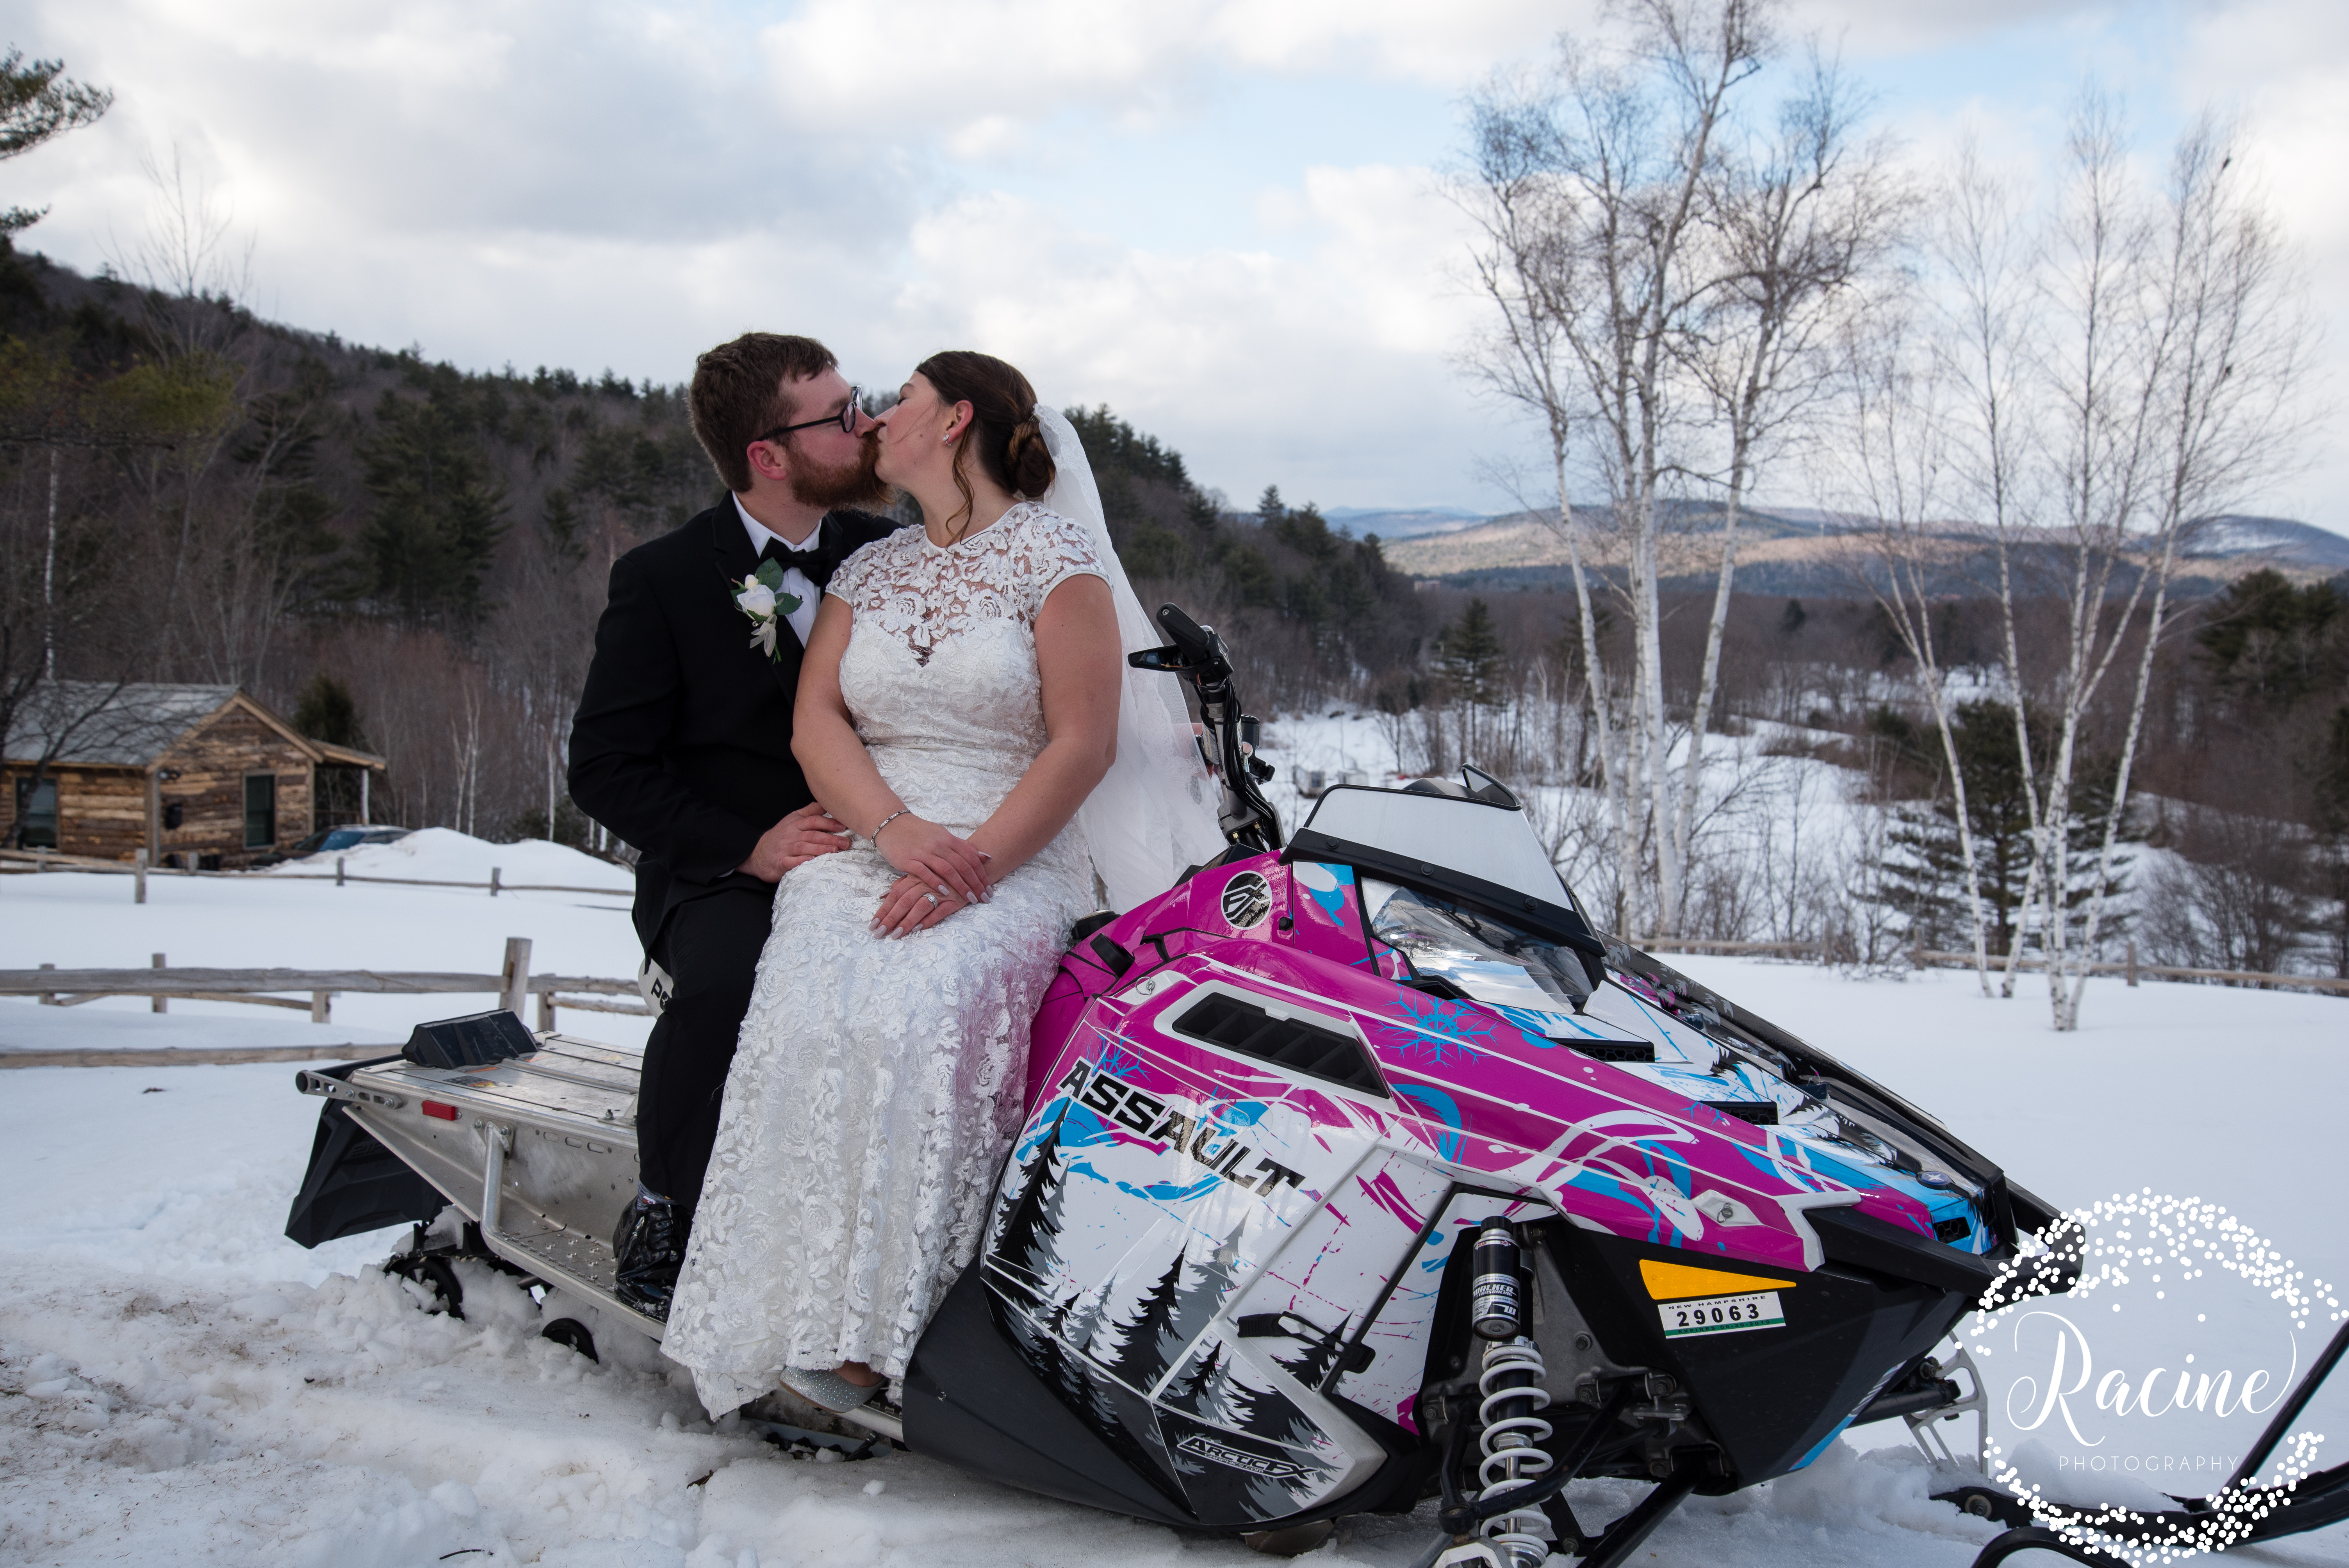 kissing on the snowmobile